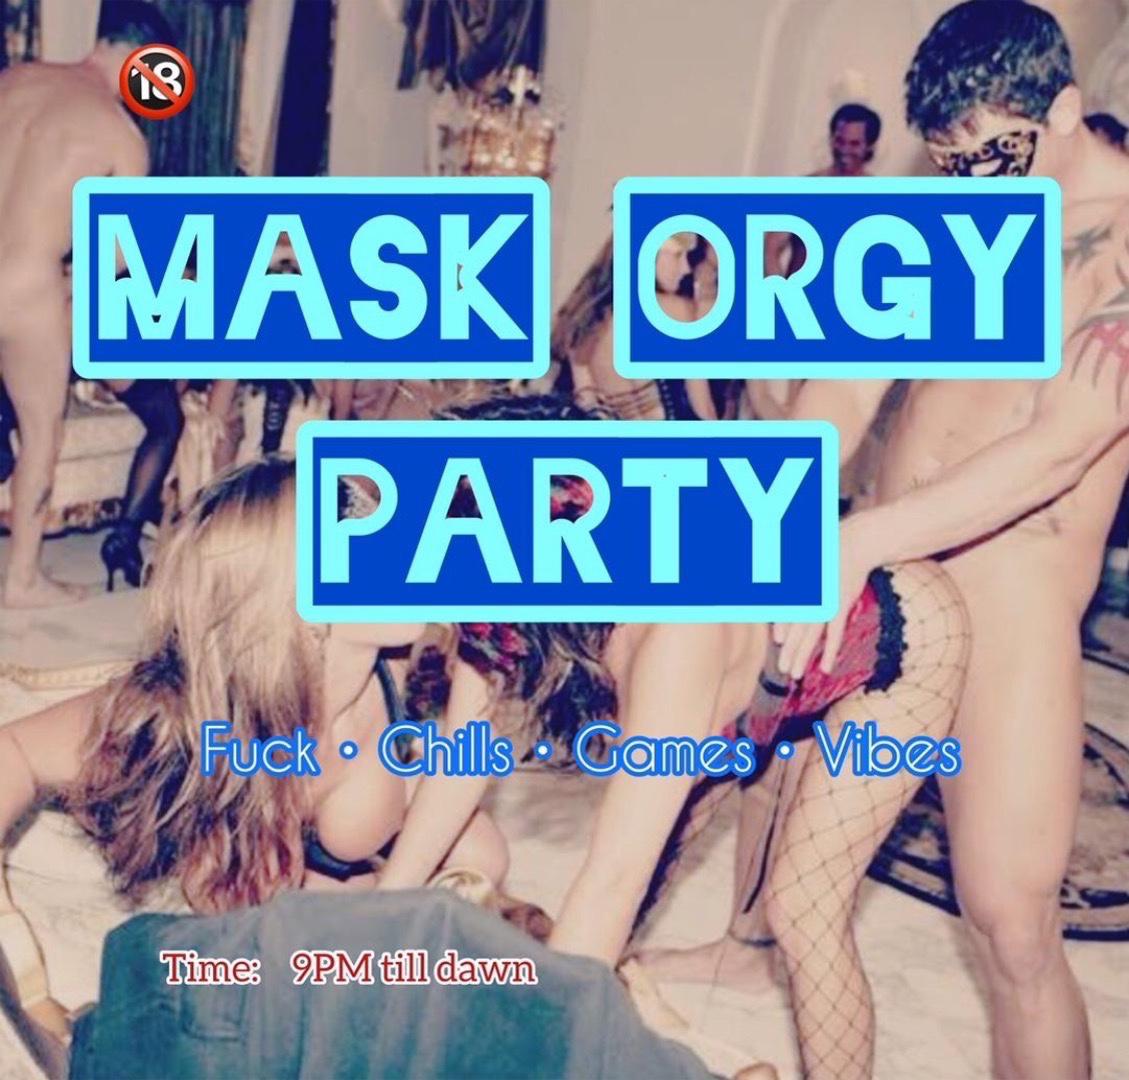 ORGY PARTY with secure apartment TEXT TO BUY YOUR TICKET Till DAWN. 2513851263